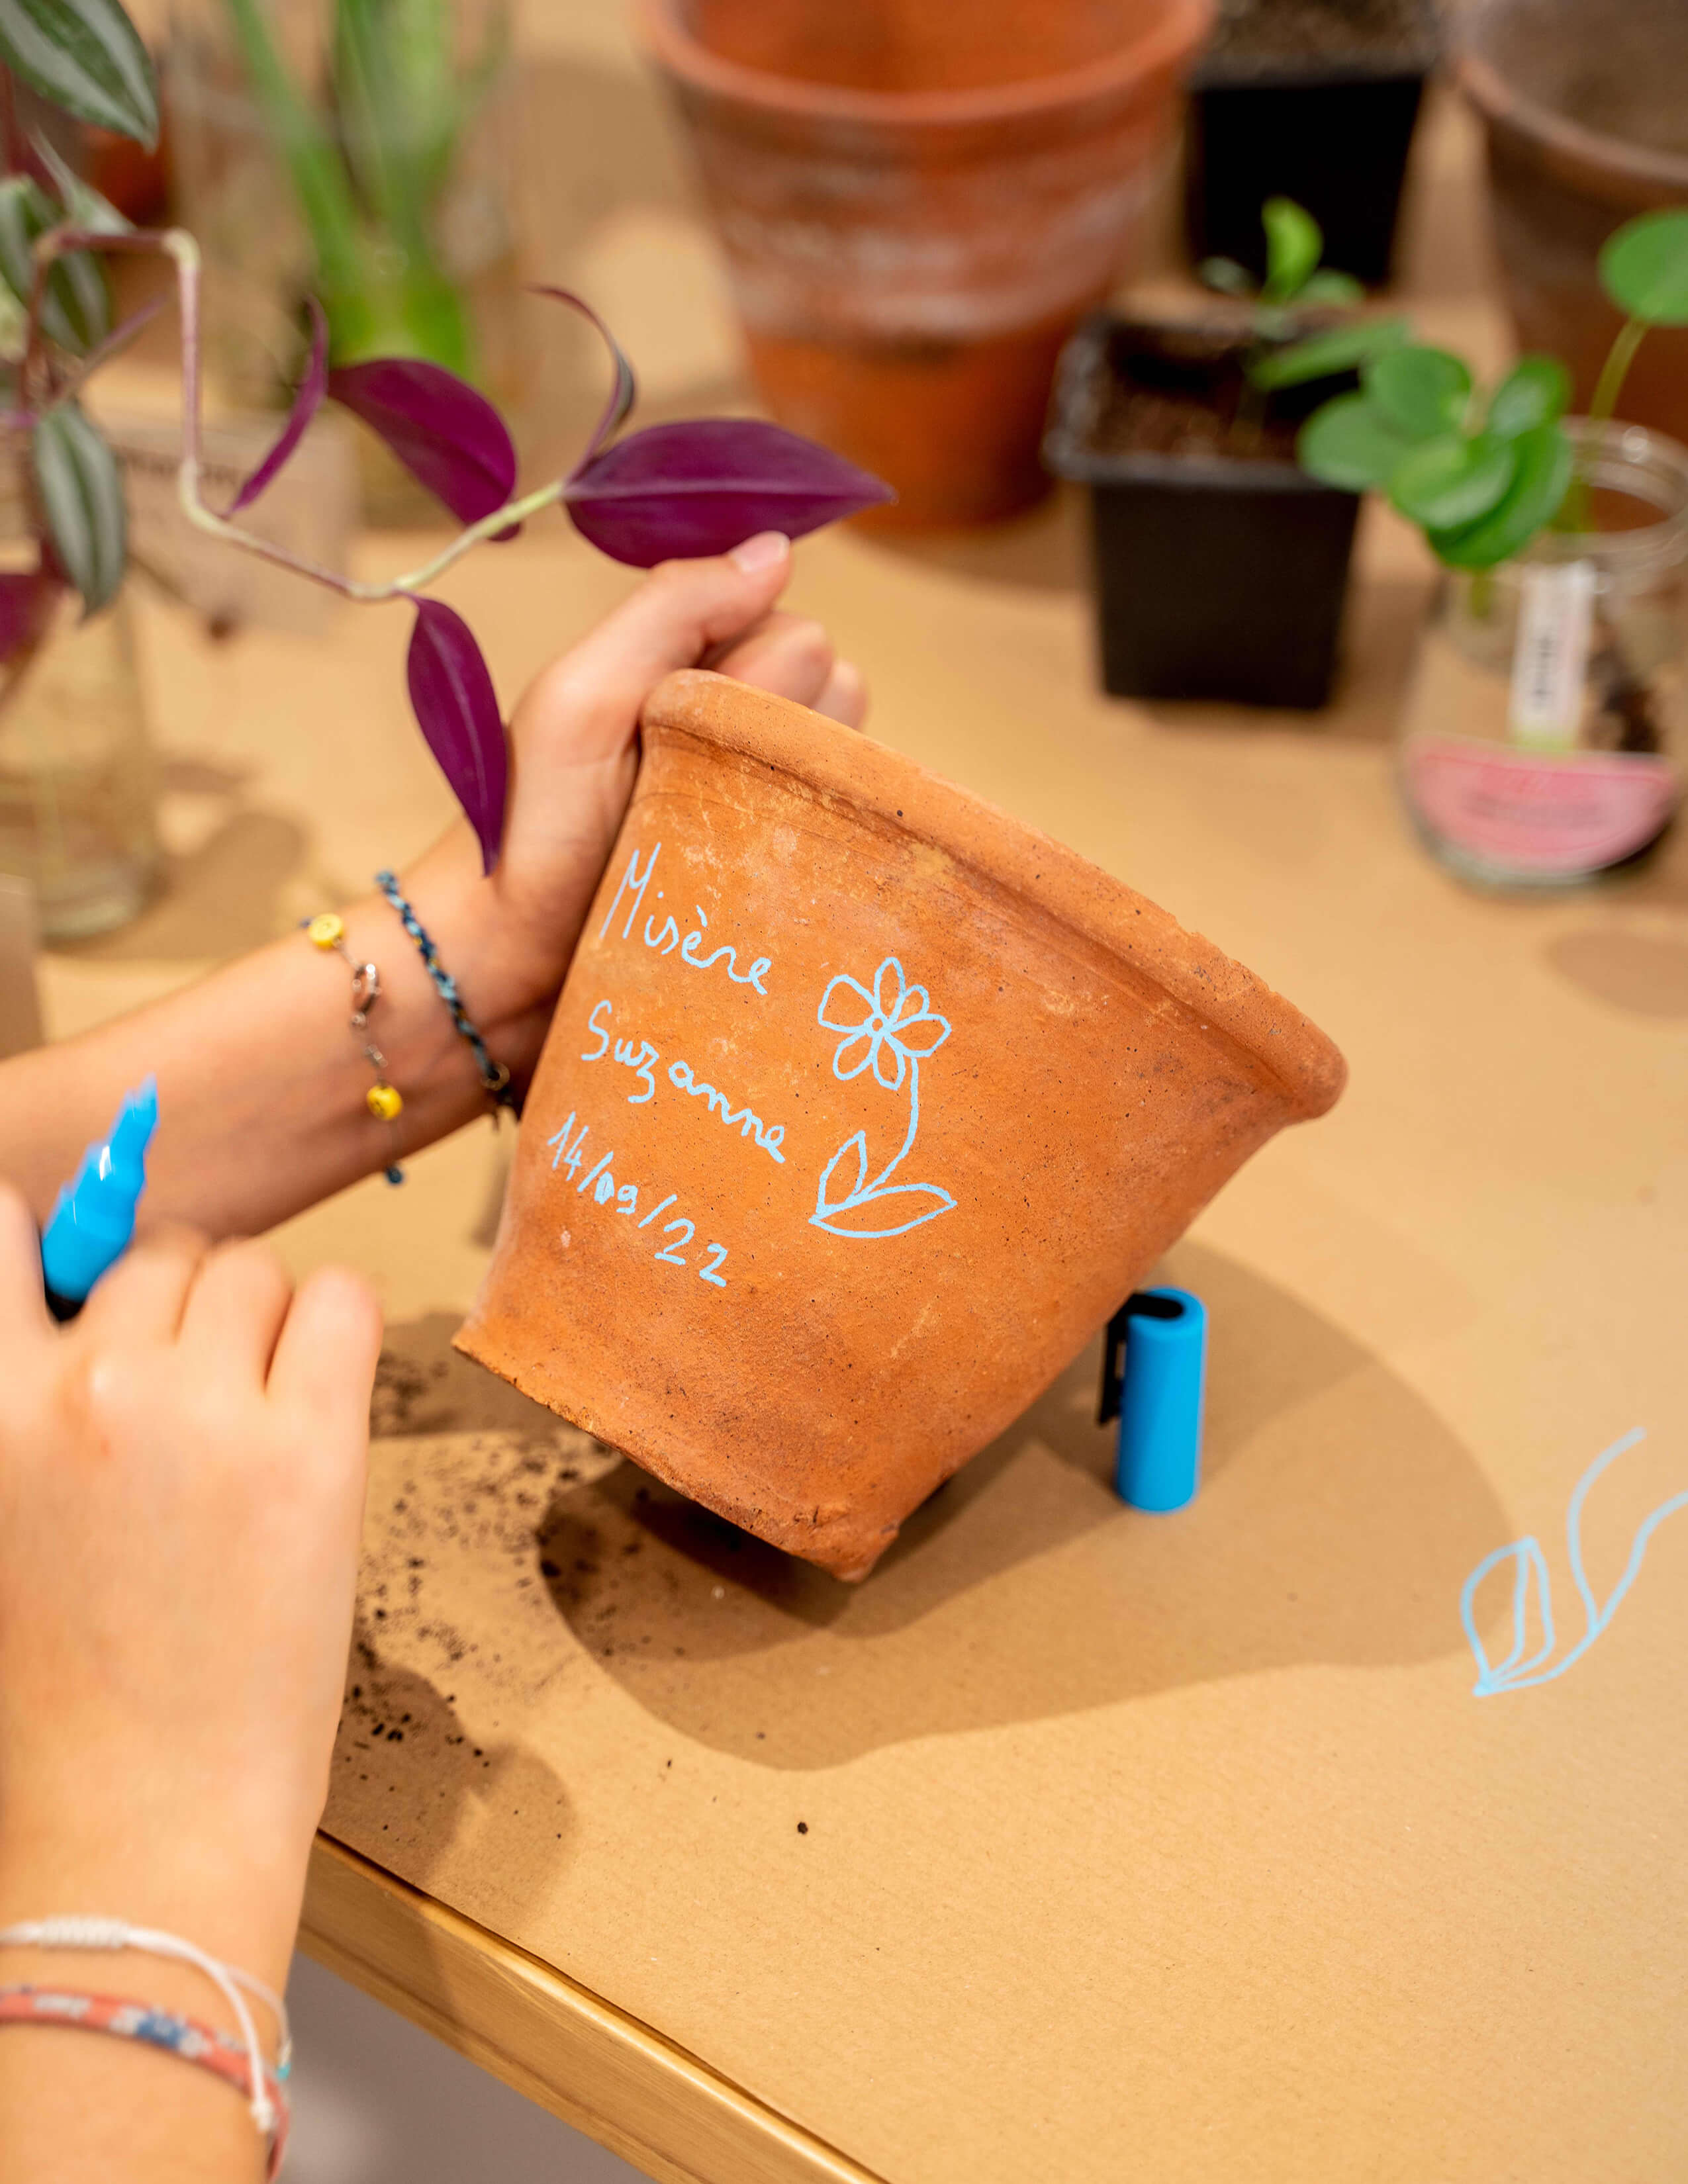 A terracotta pot is written with names on it in light blue ink marker on the table while surrounded by different plants.